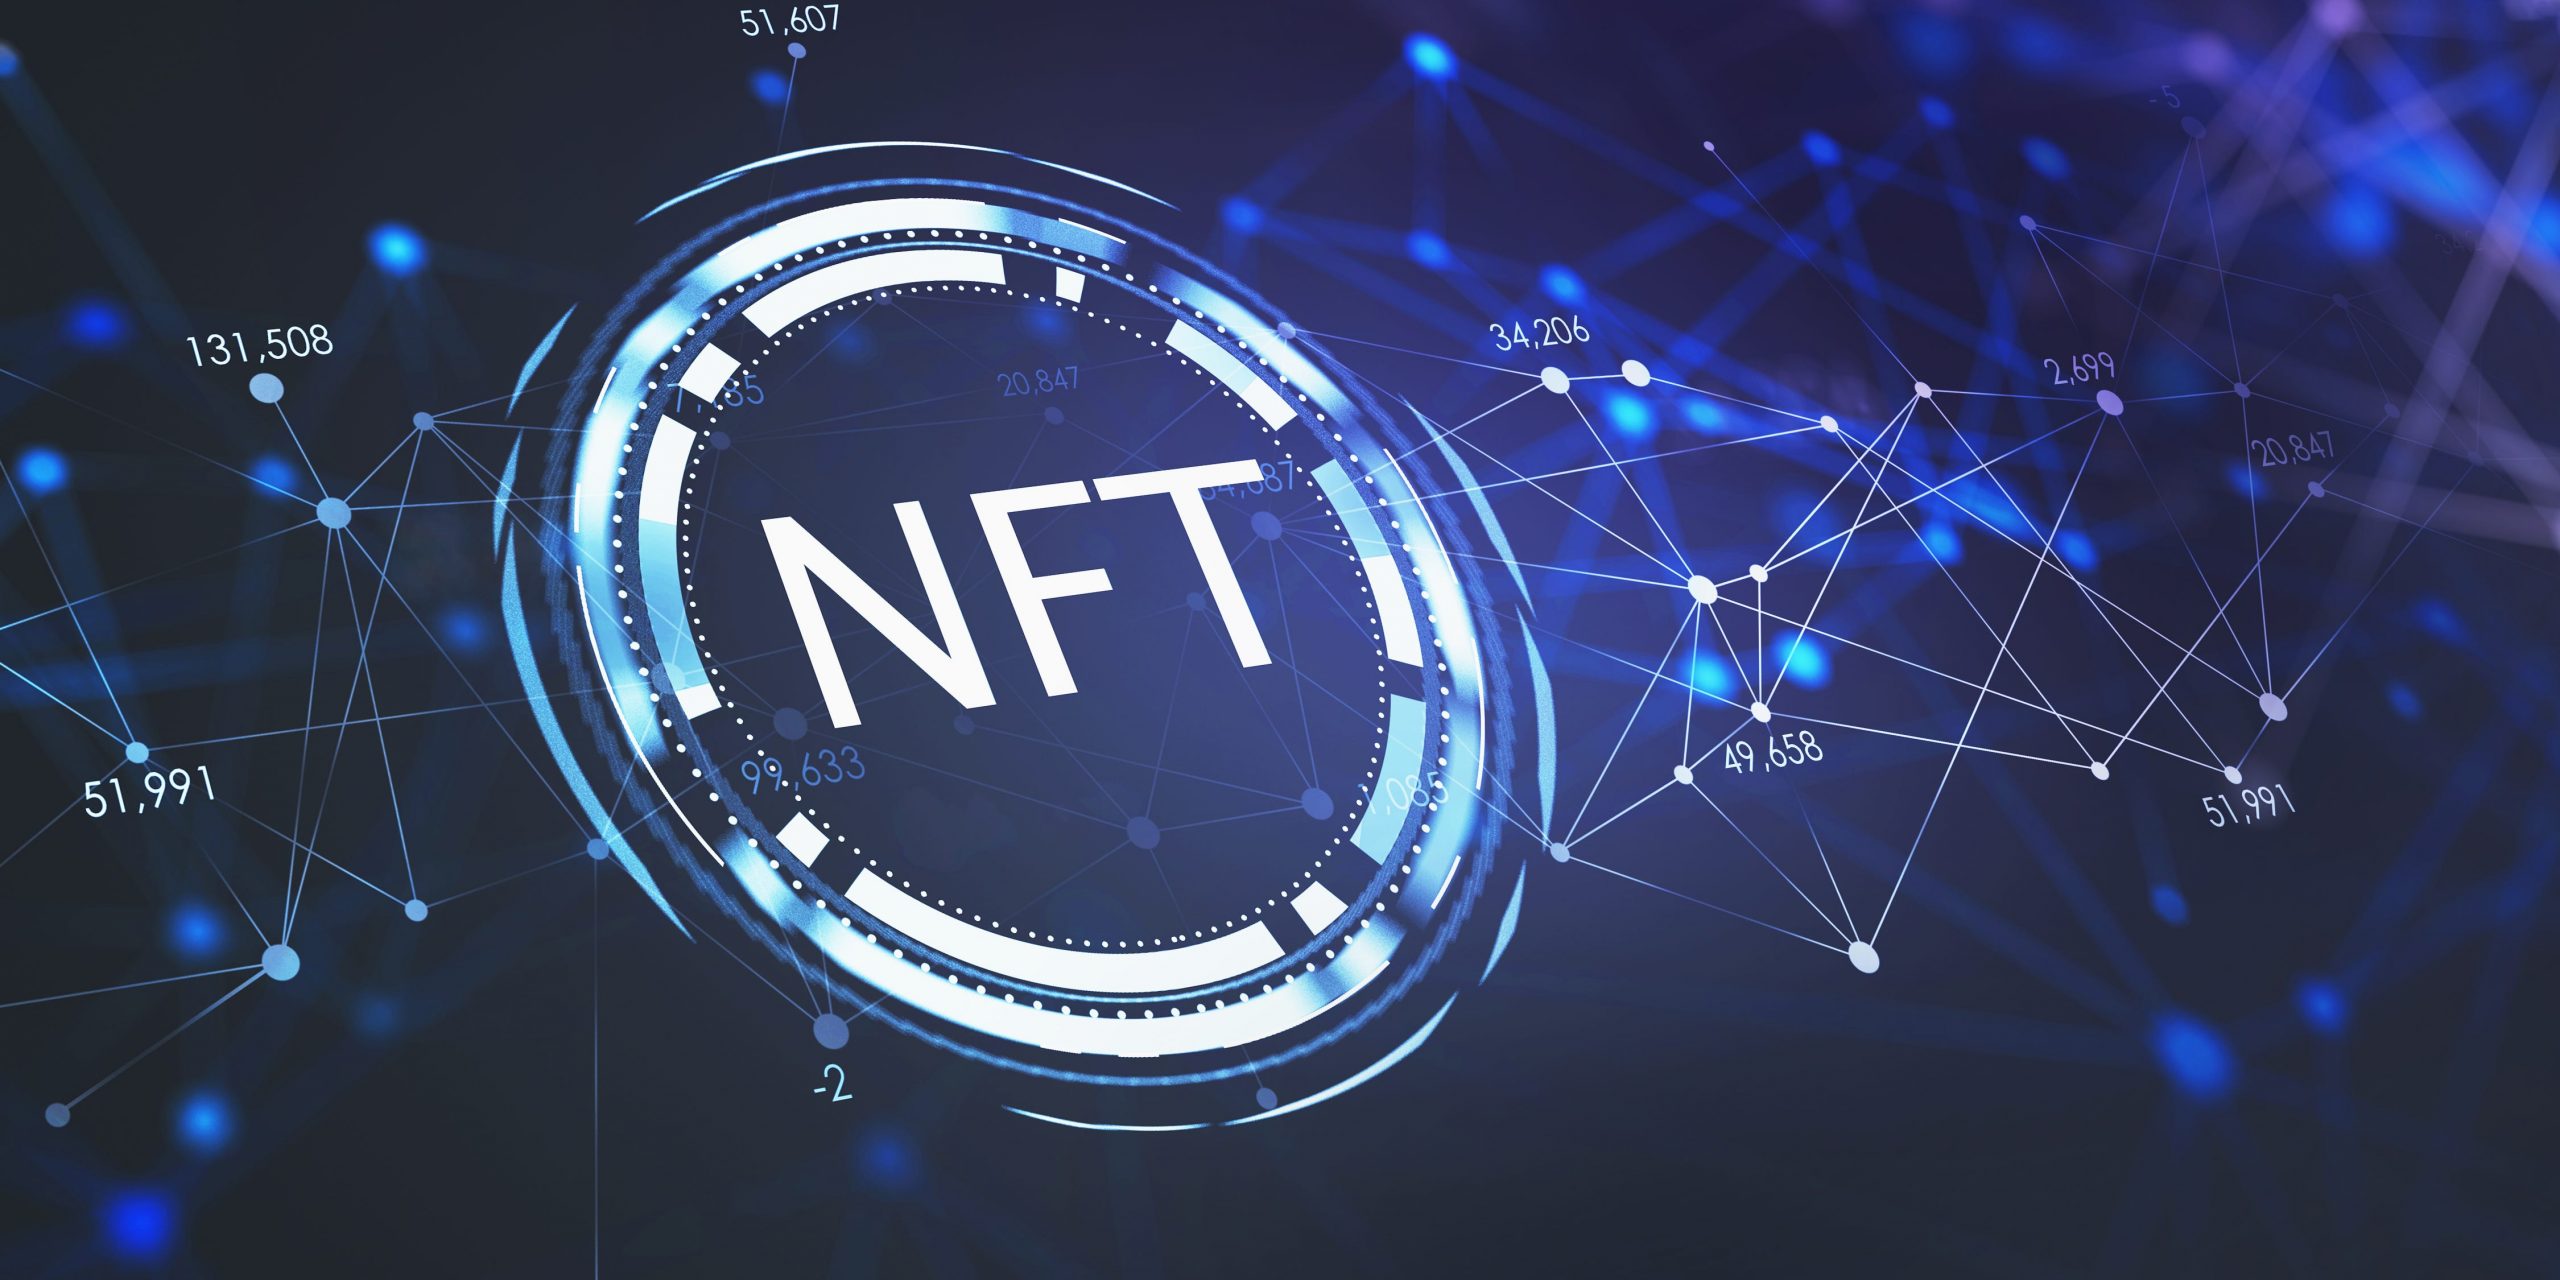 White holographic non-fungible token (NFT) icon in blue cyberspace